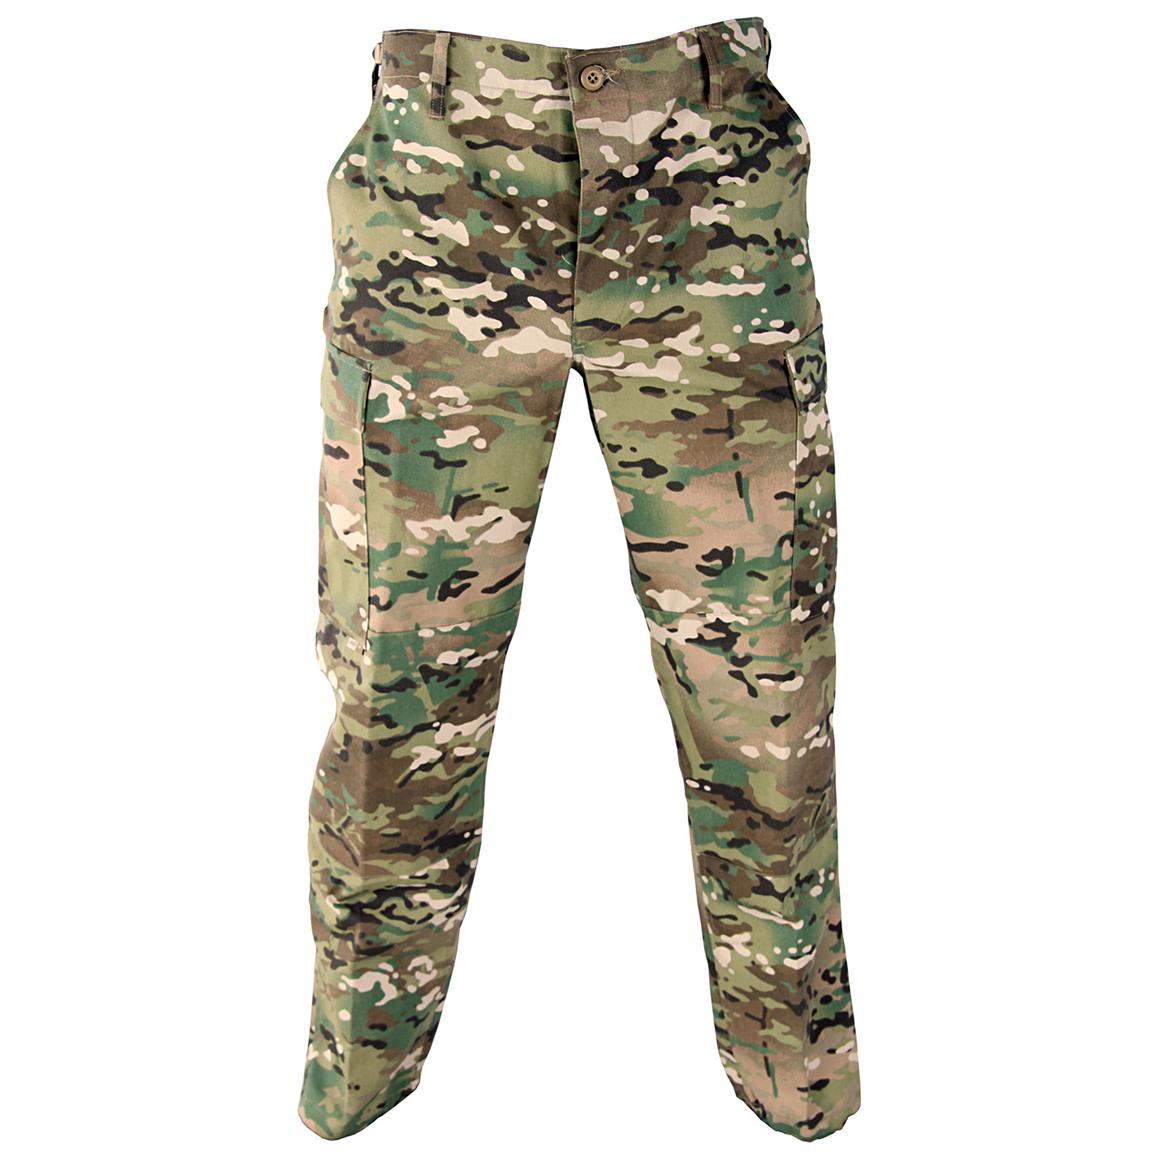 Propper™ Twill BDU Pants - 593632, Tactical Clothing at Sportsman's Guide